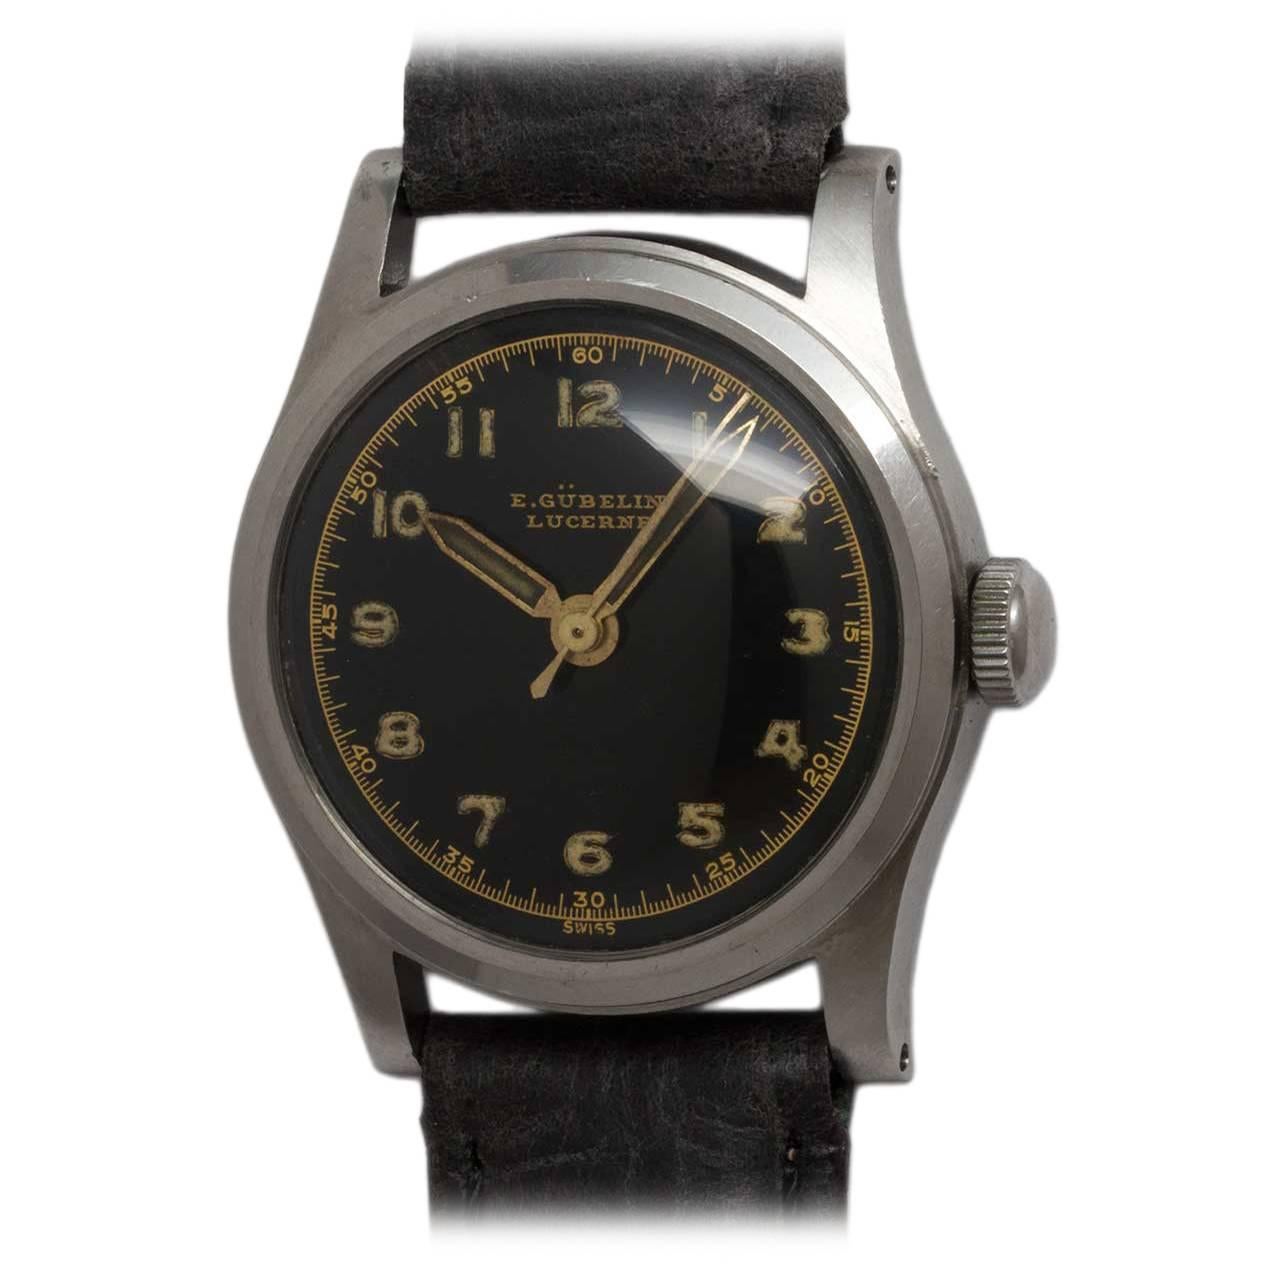 Gubelin Stainless Steel Military Style Wristwatch circa 1940s